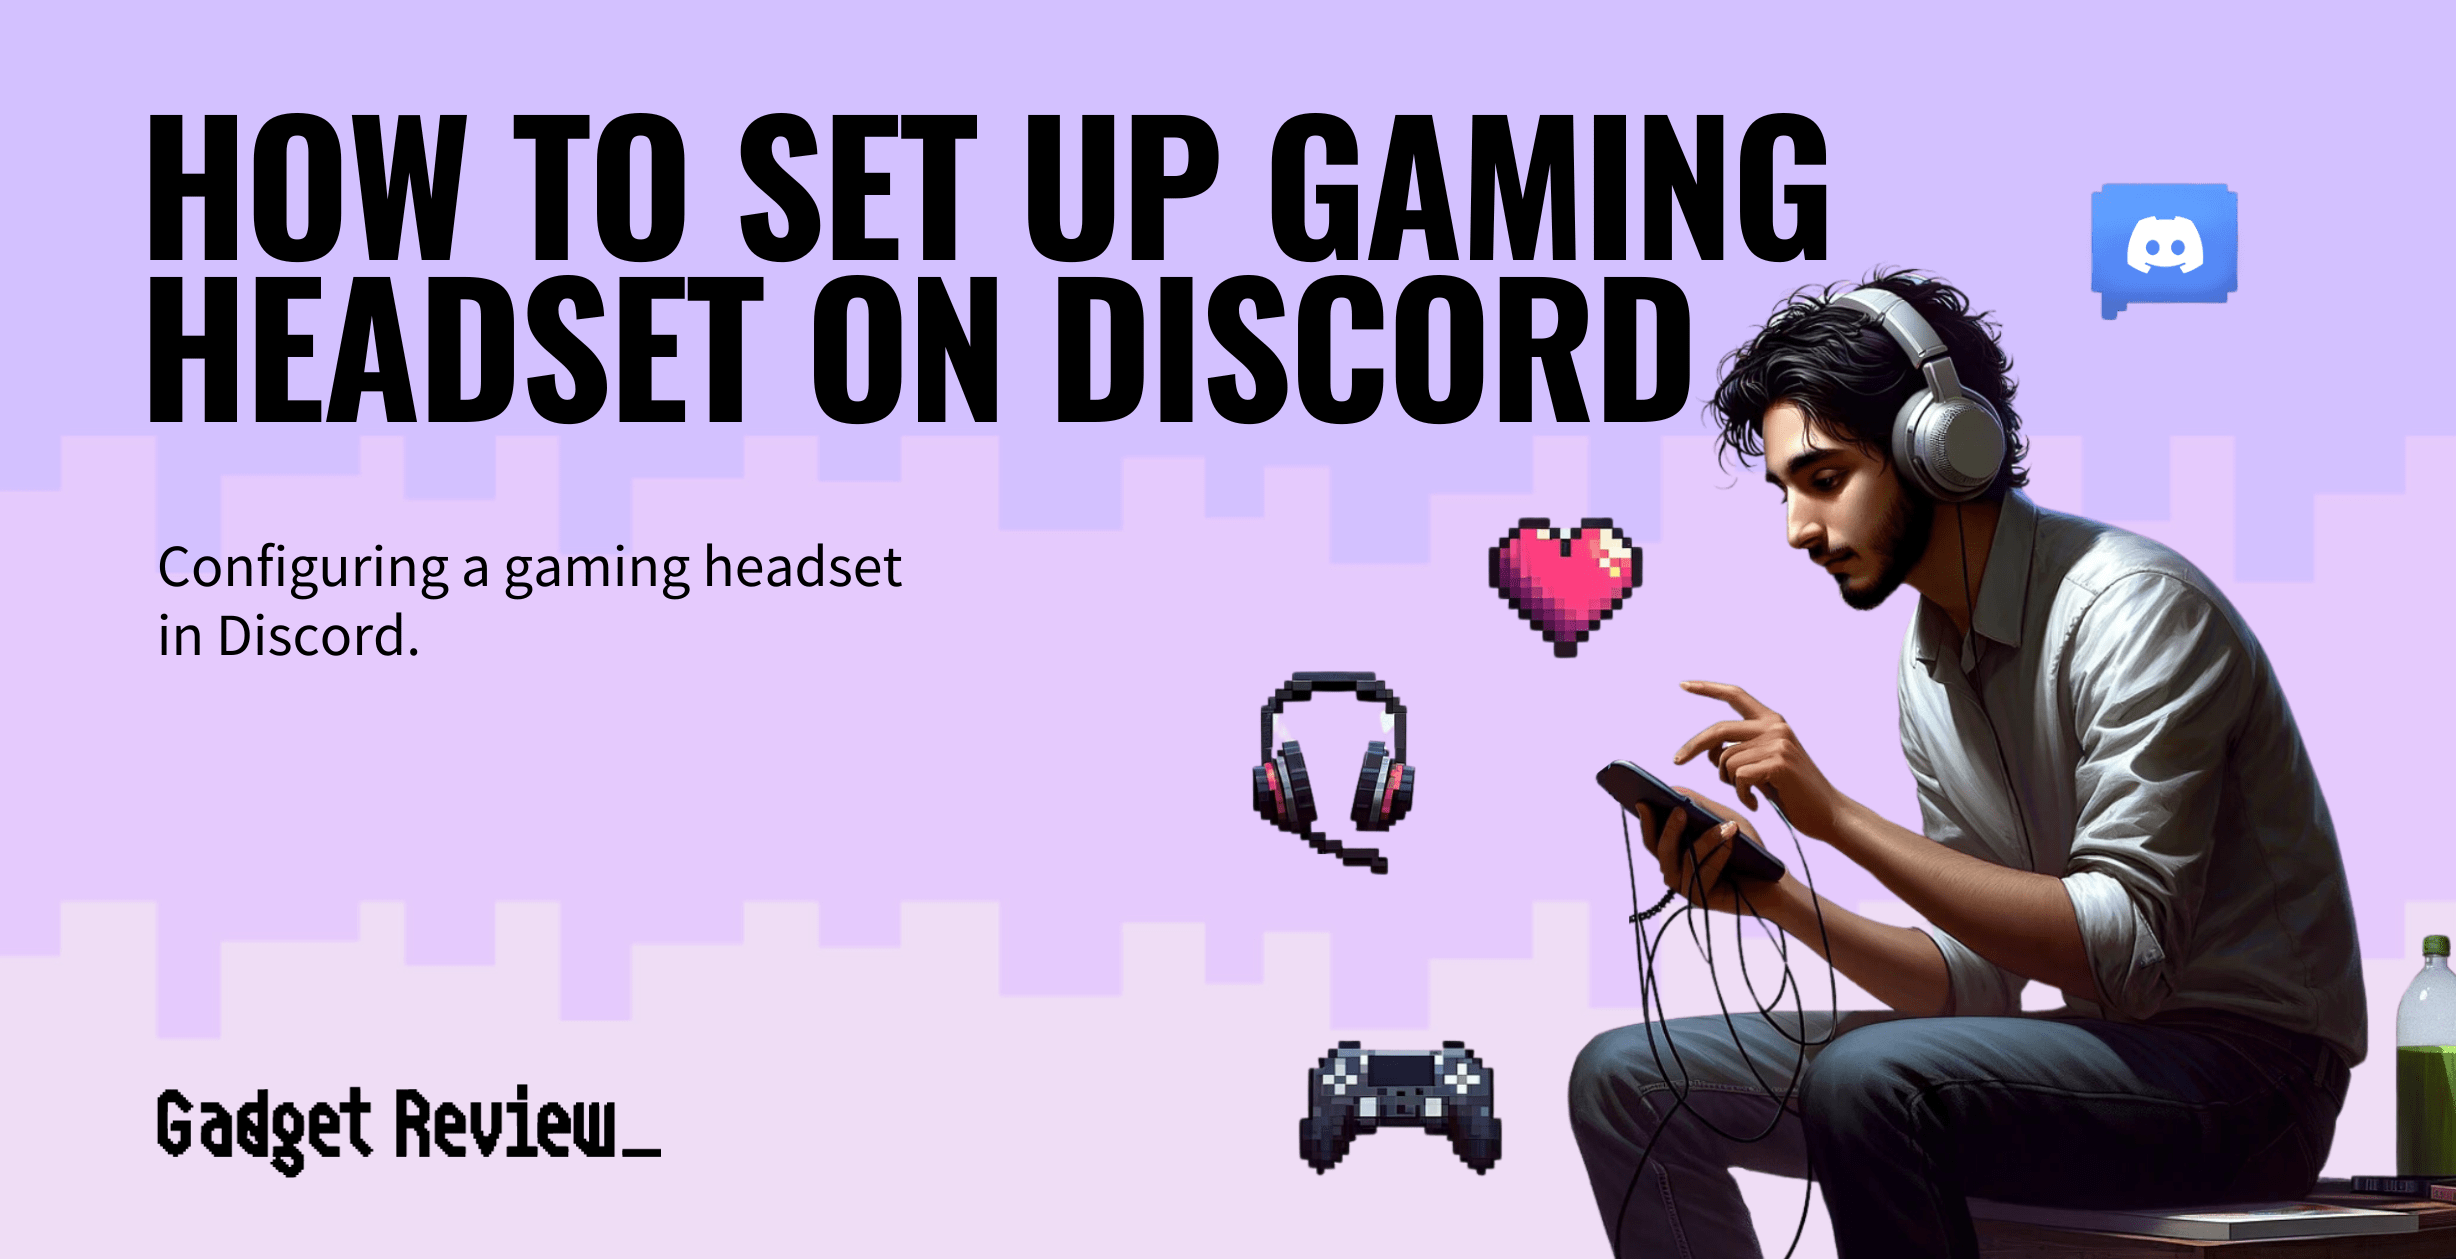 how to set up gaming headset on discord guide